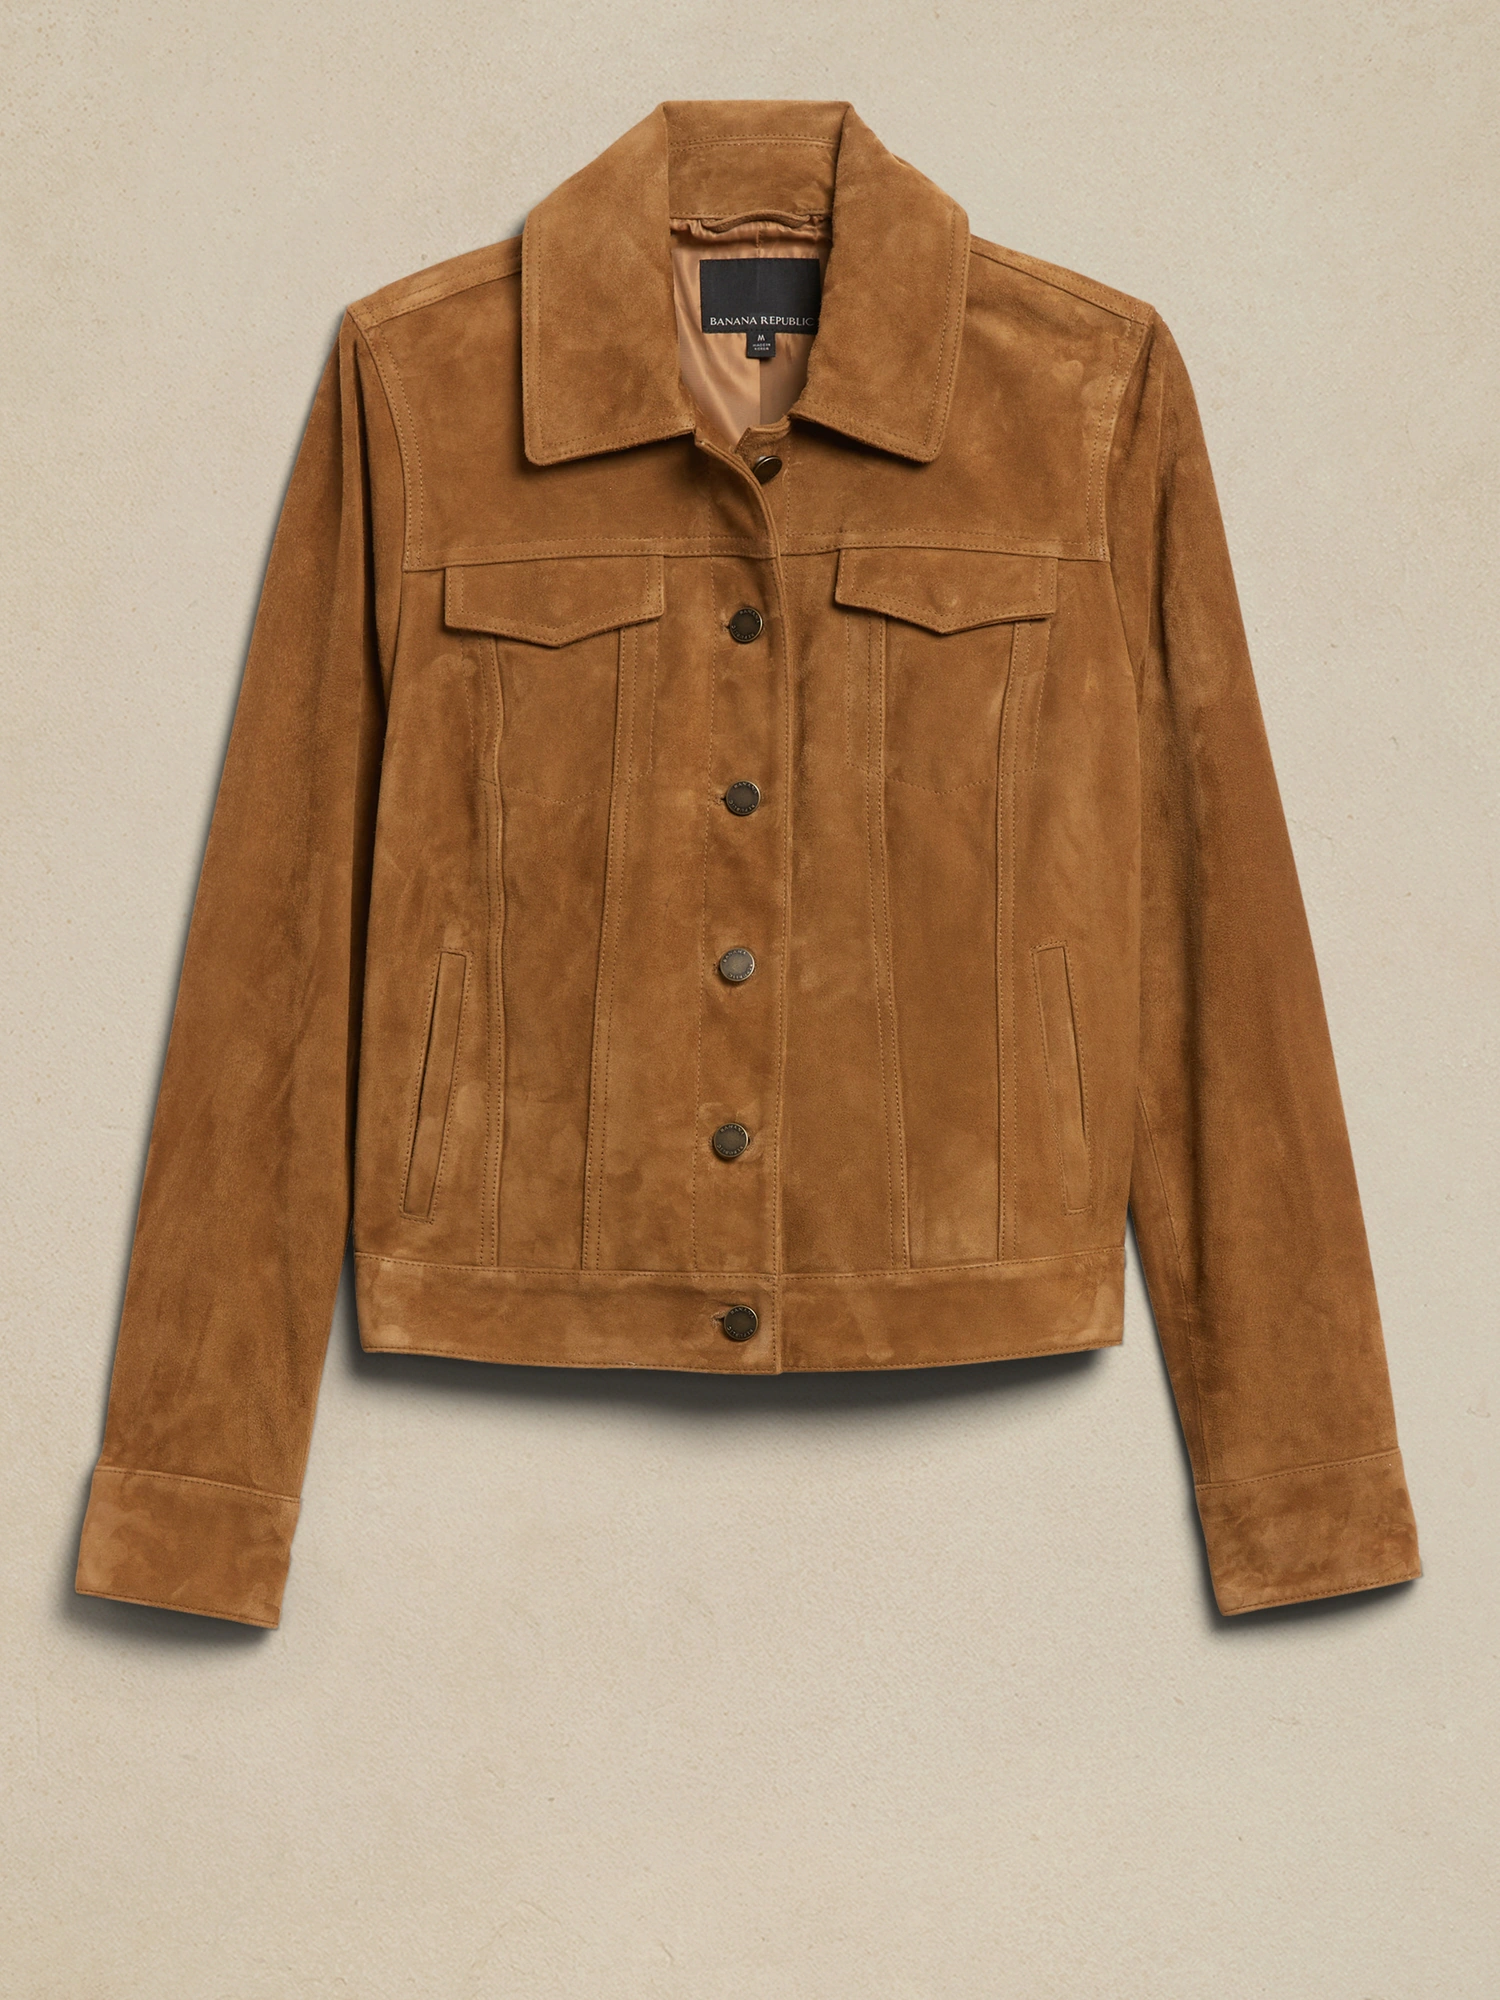 Splurgeworthy Pieces For Fall At Banana Republic suede trucker jacket classic jackets to keep forever what jackets are worth investing in personal stylists talk investing in clothes